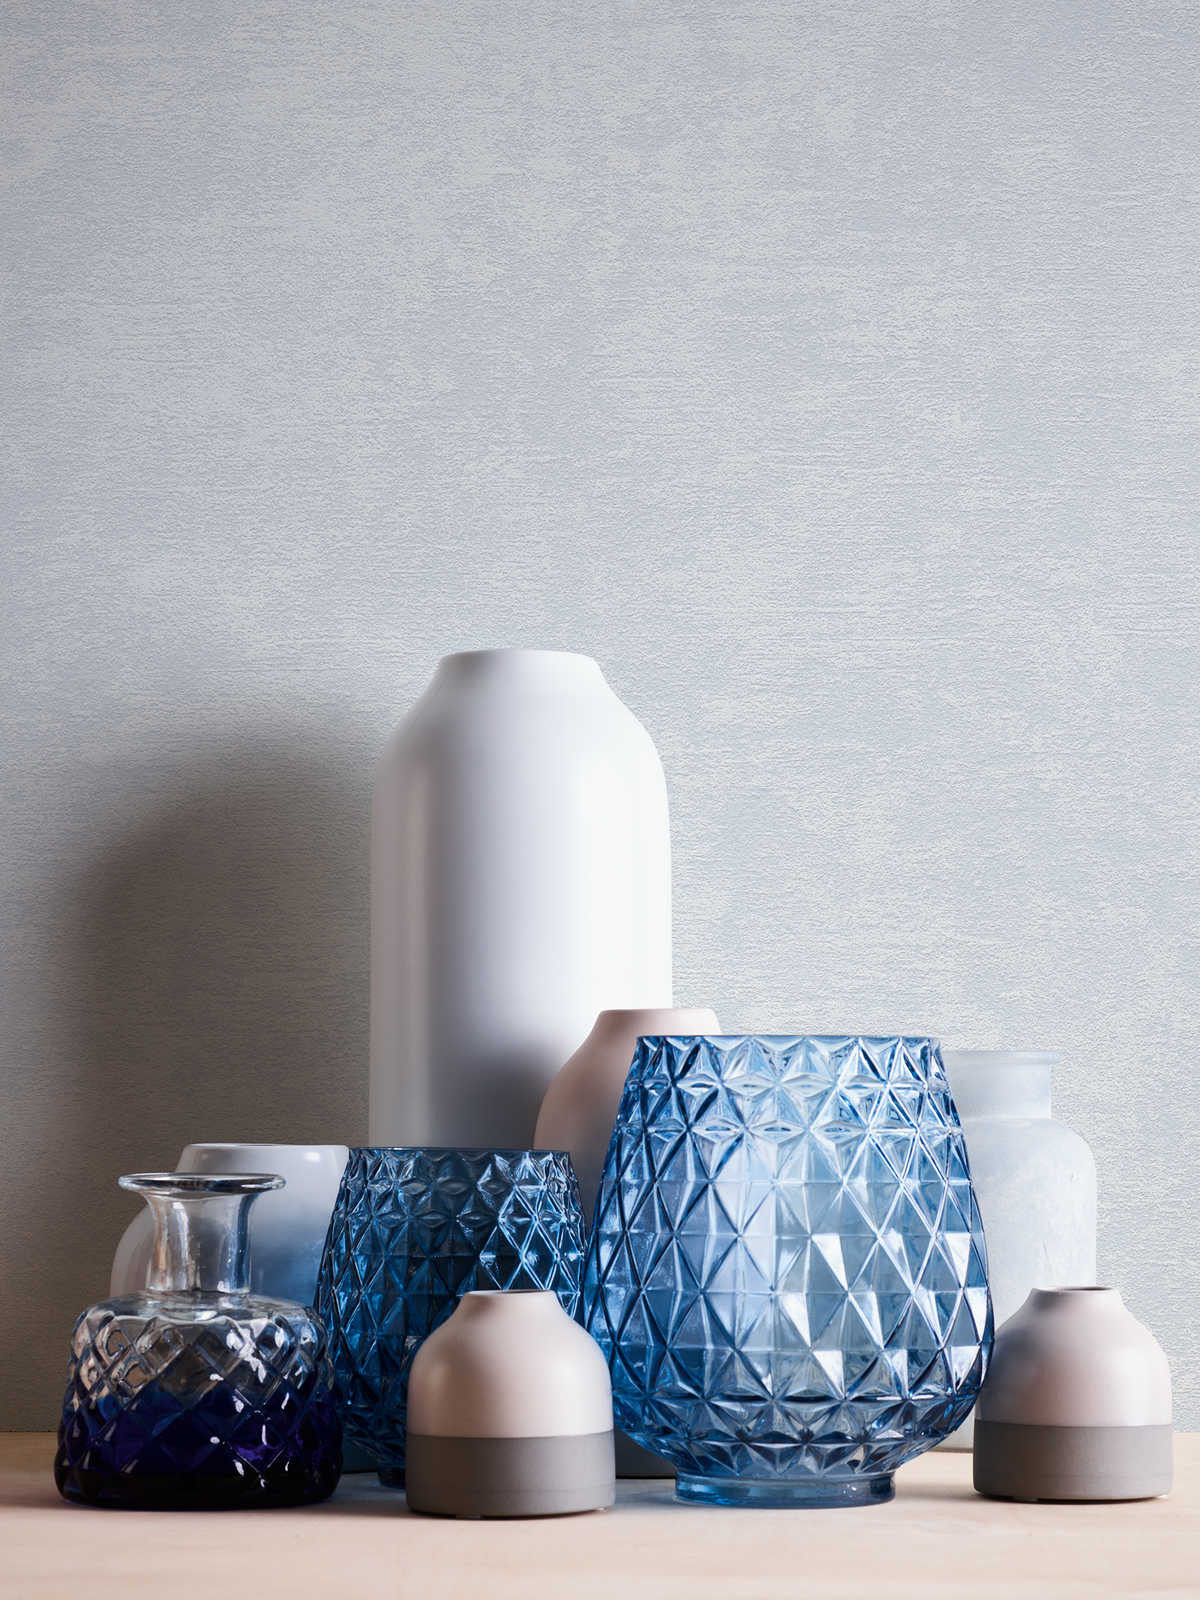             Bright plaster look non-woven wallpaper with texture effect - blue
        